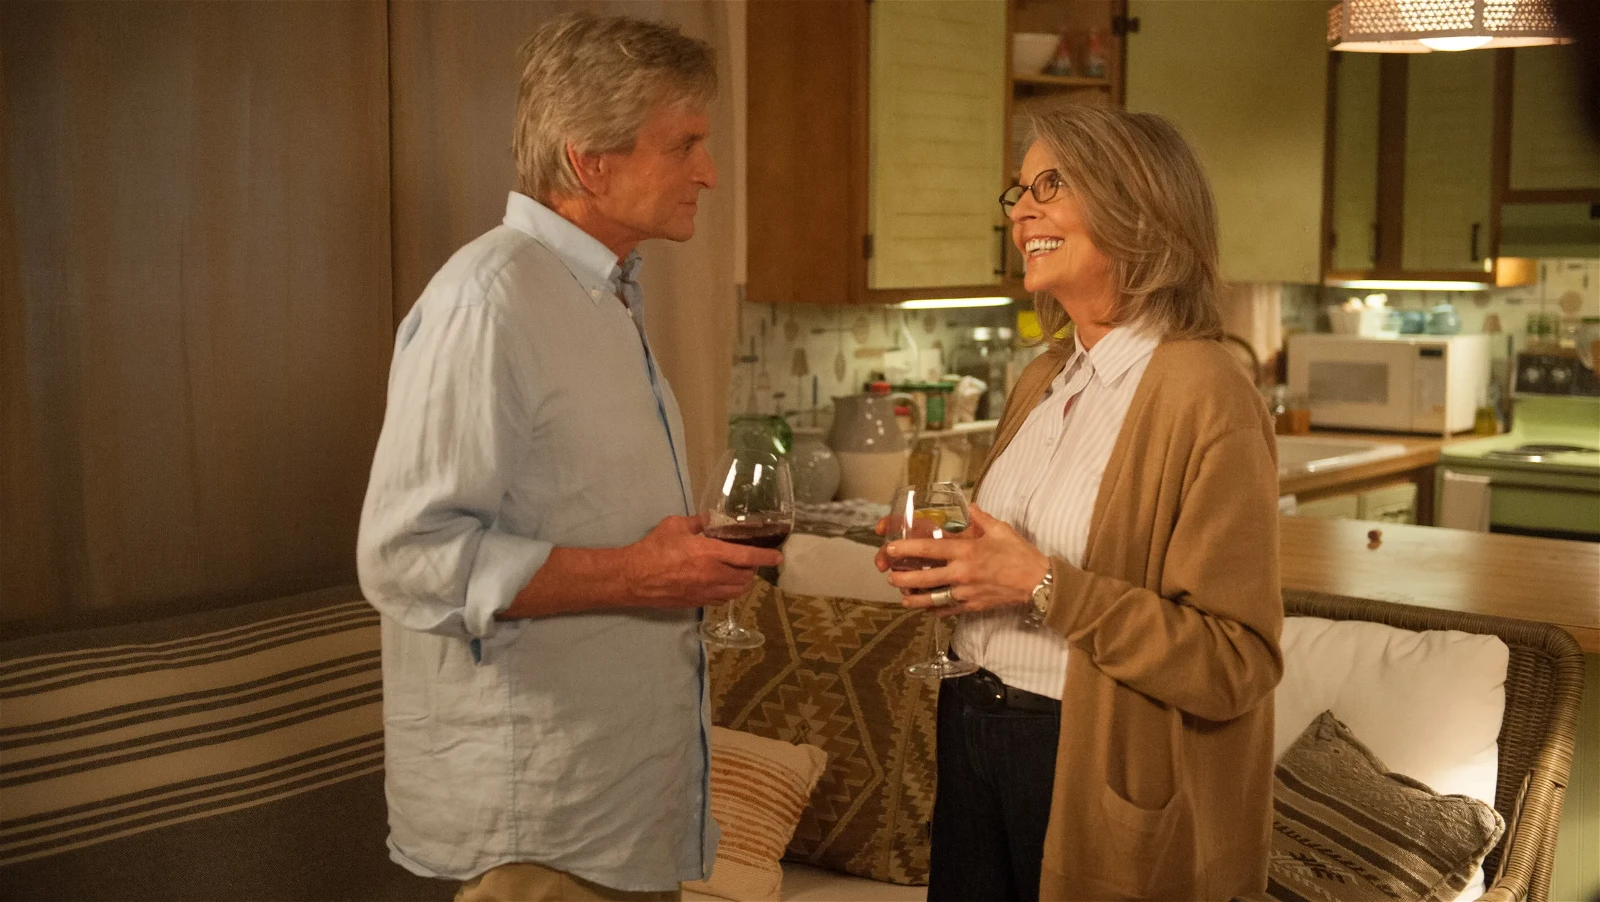 Michael Douglas and Diane Keaton in a still from the movie